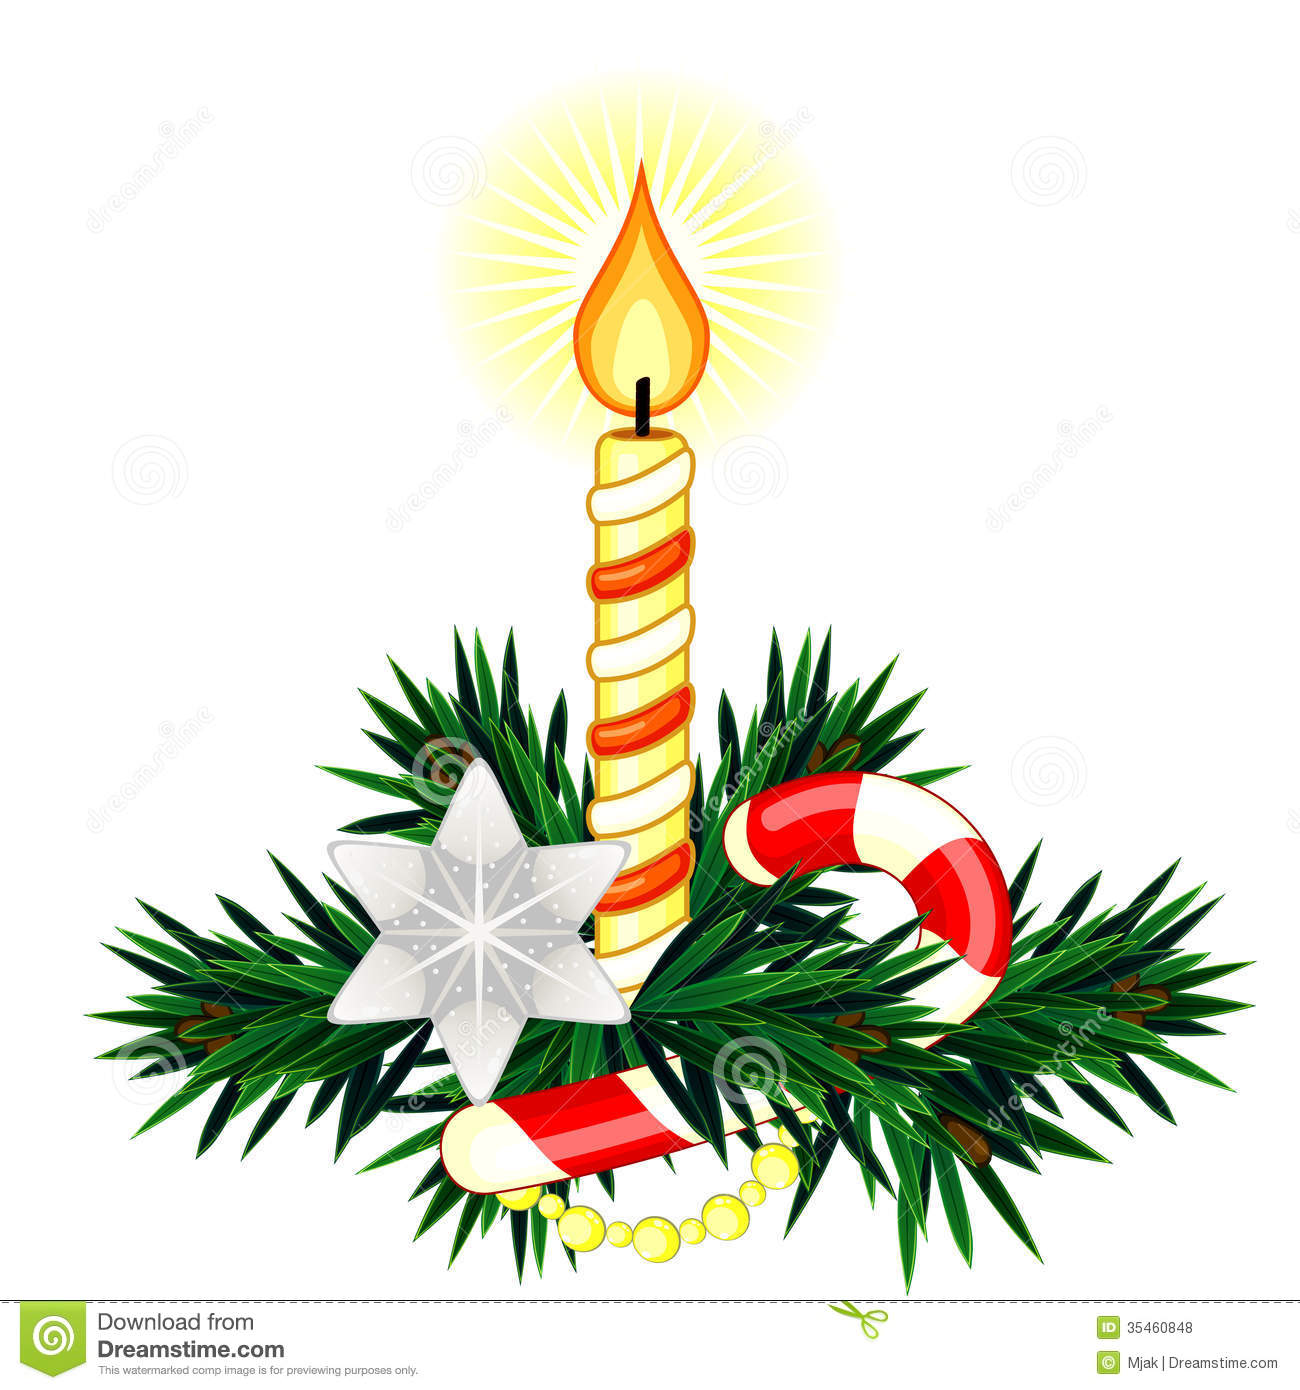 Christmas Composition With Candle And Sugar Cane Royalty Free Stock